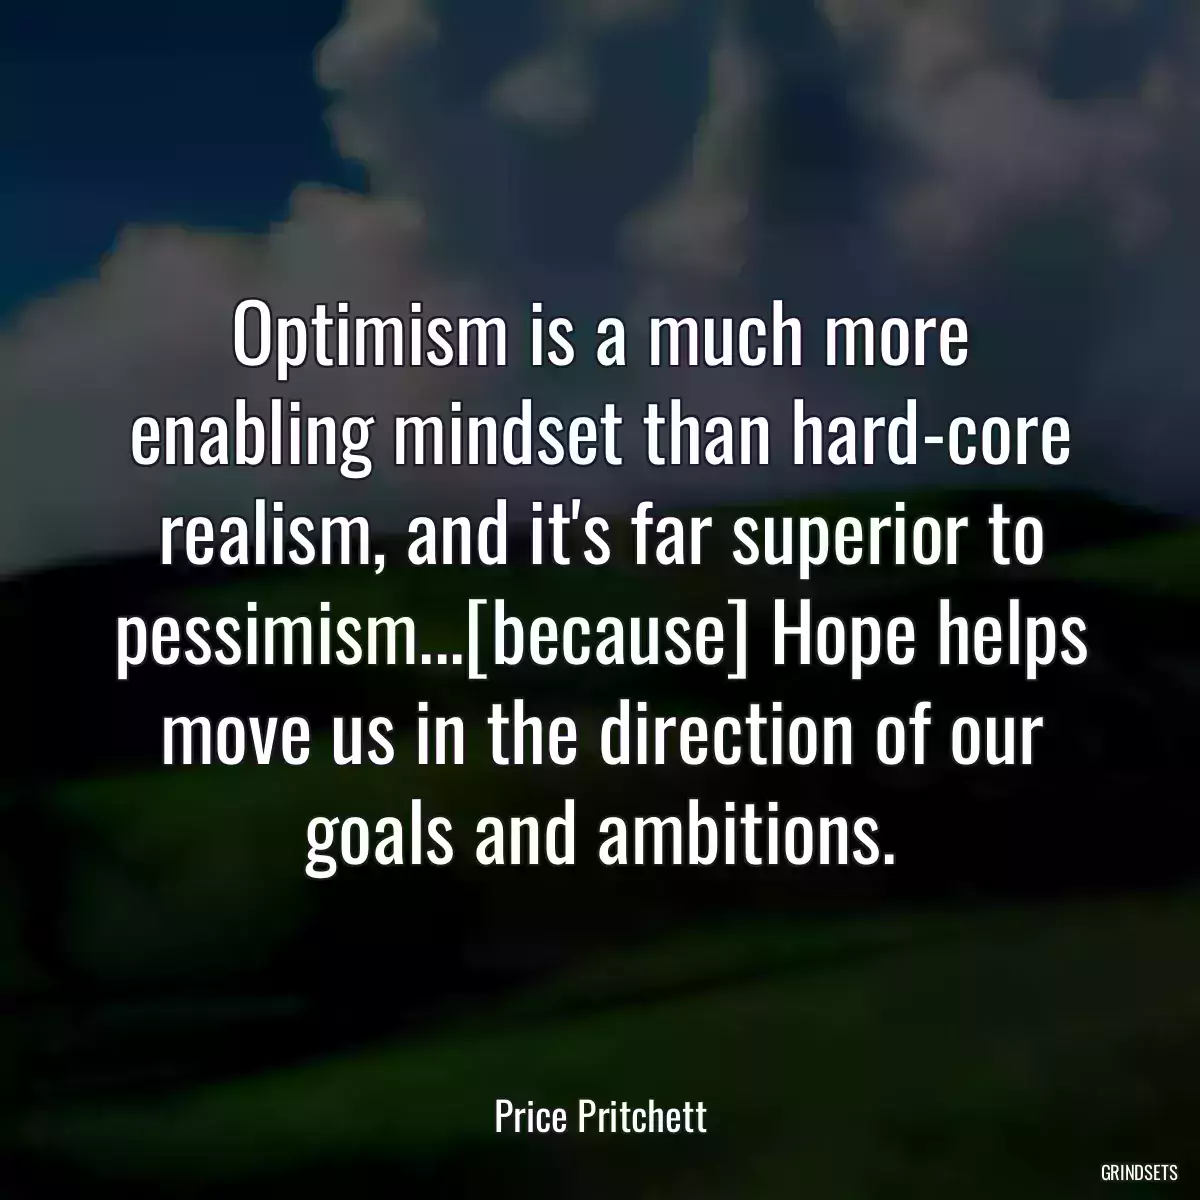 Optimism is a much more enabling mindset than hard-core realism, and it\'s far superior to pessimism...[because] Hope helps move us in the direction of our goals and ambitions.